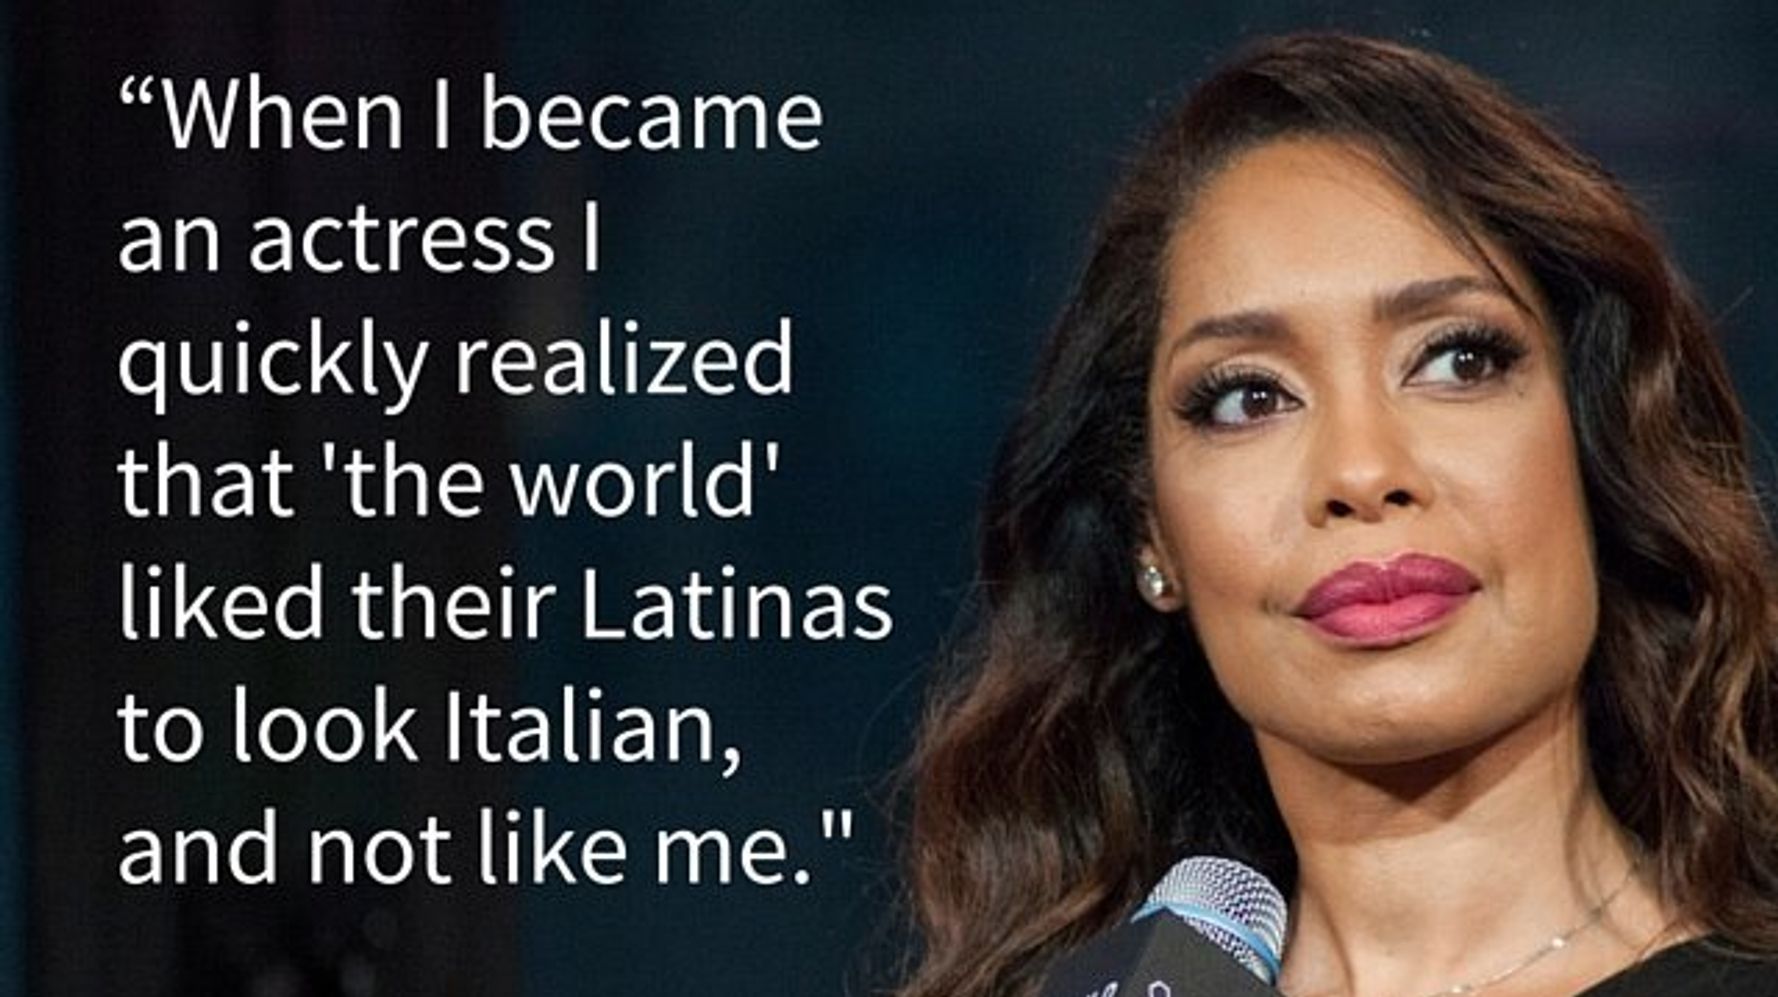 9 Famous Faces On The Struggles And Beauty Of Being Afro-Latino | HuffPost